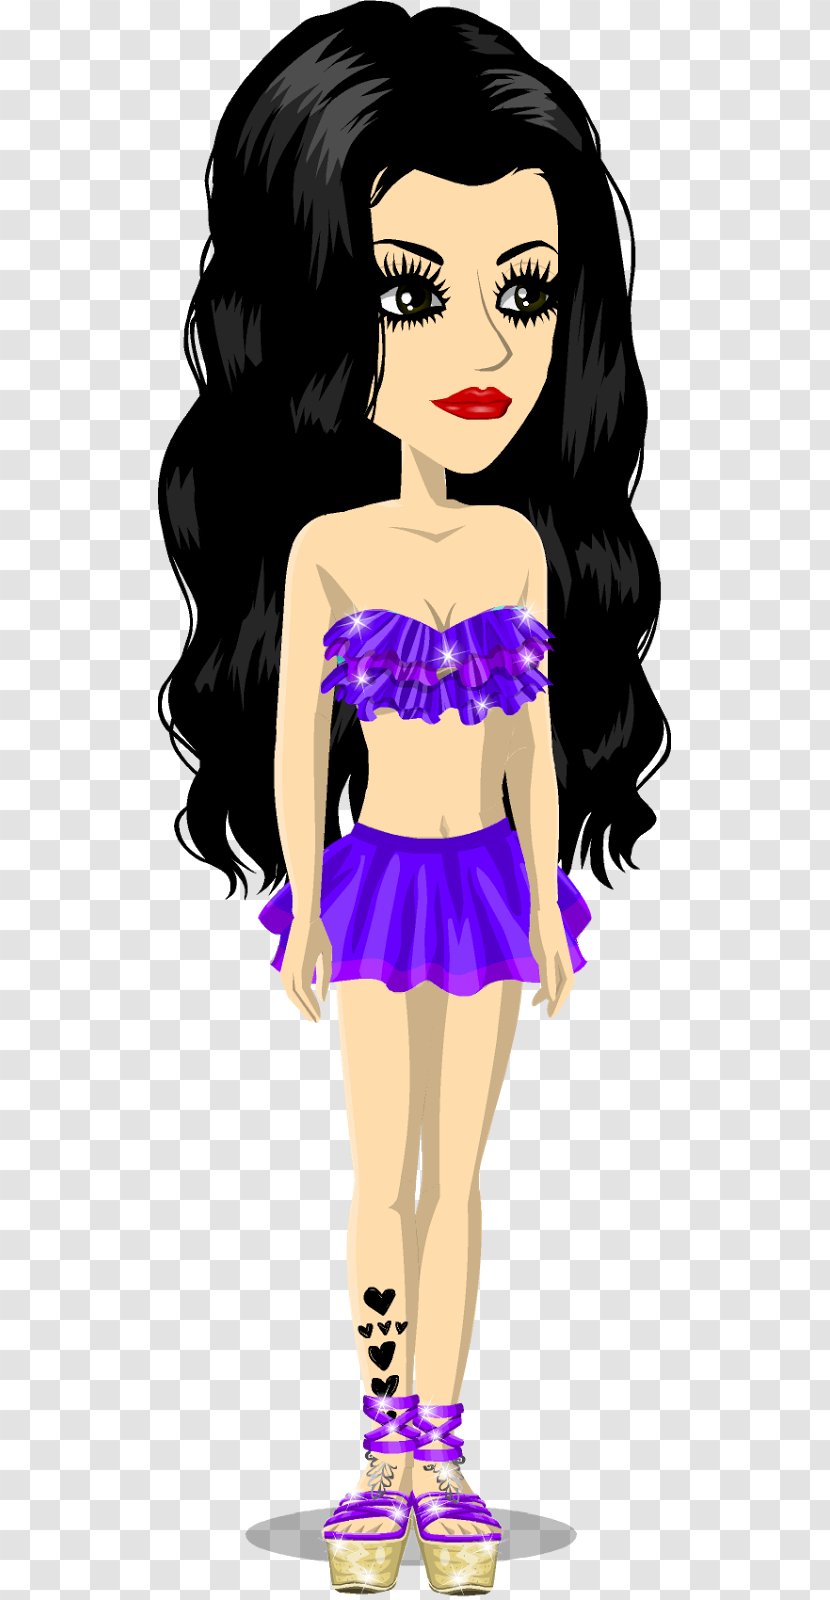 MovieStarPlanet Fashion Hairstyle Clothing Female - Cartoon - Beach Party Transparent PNG